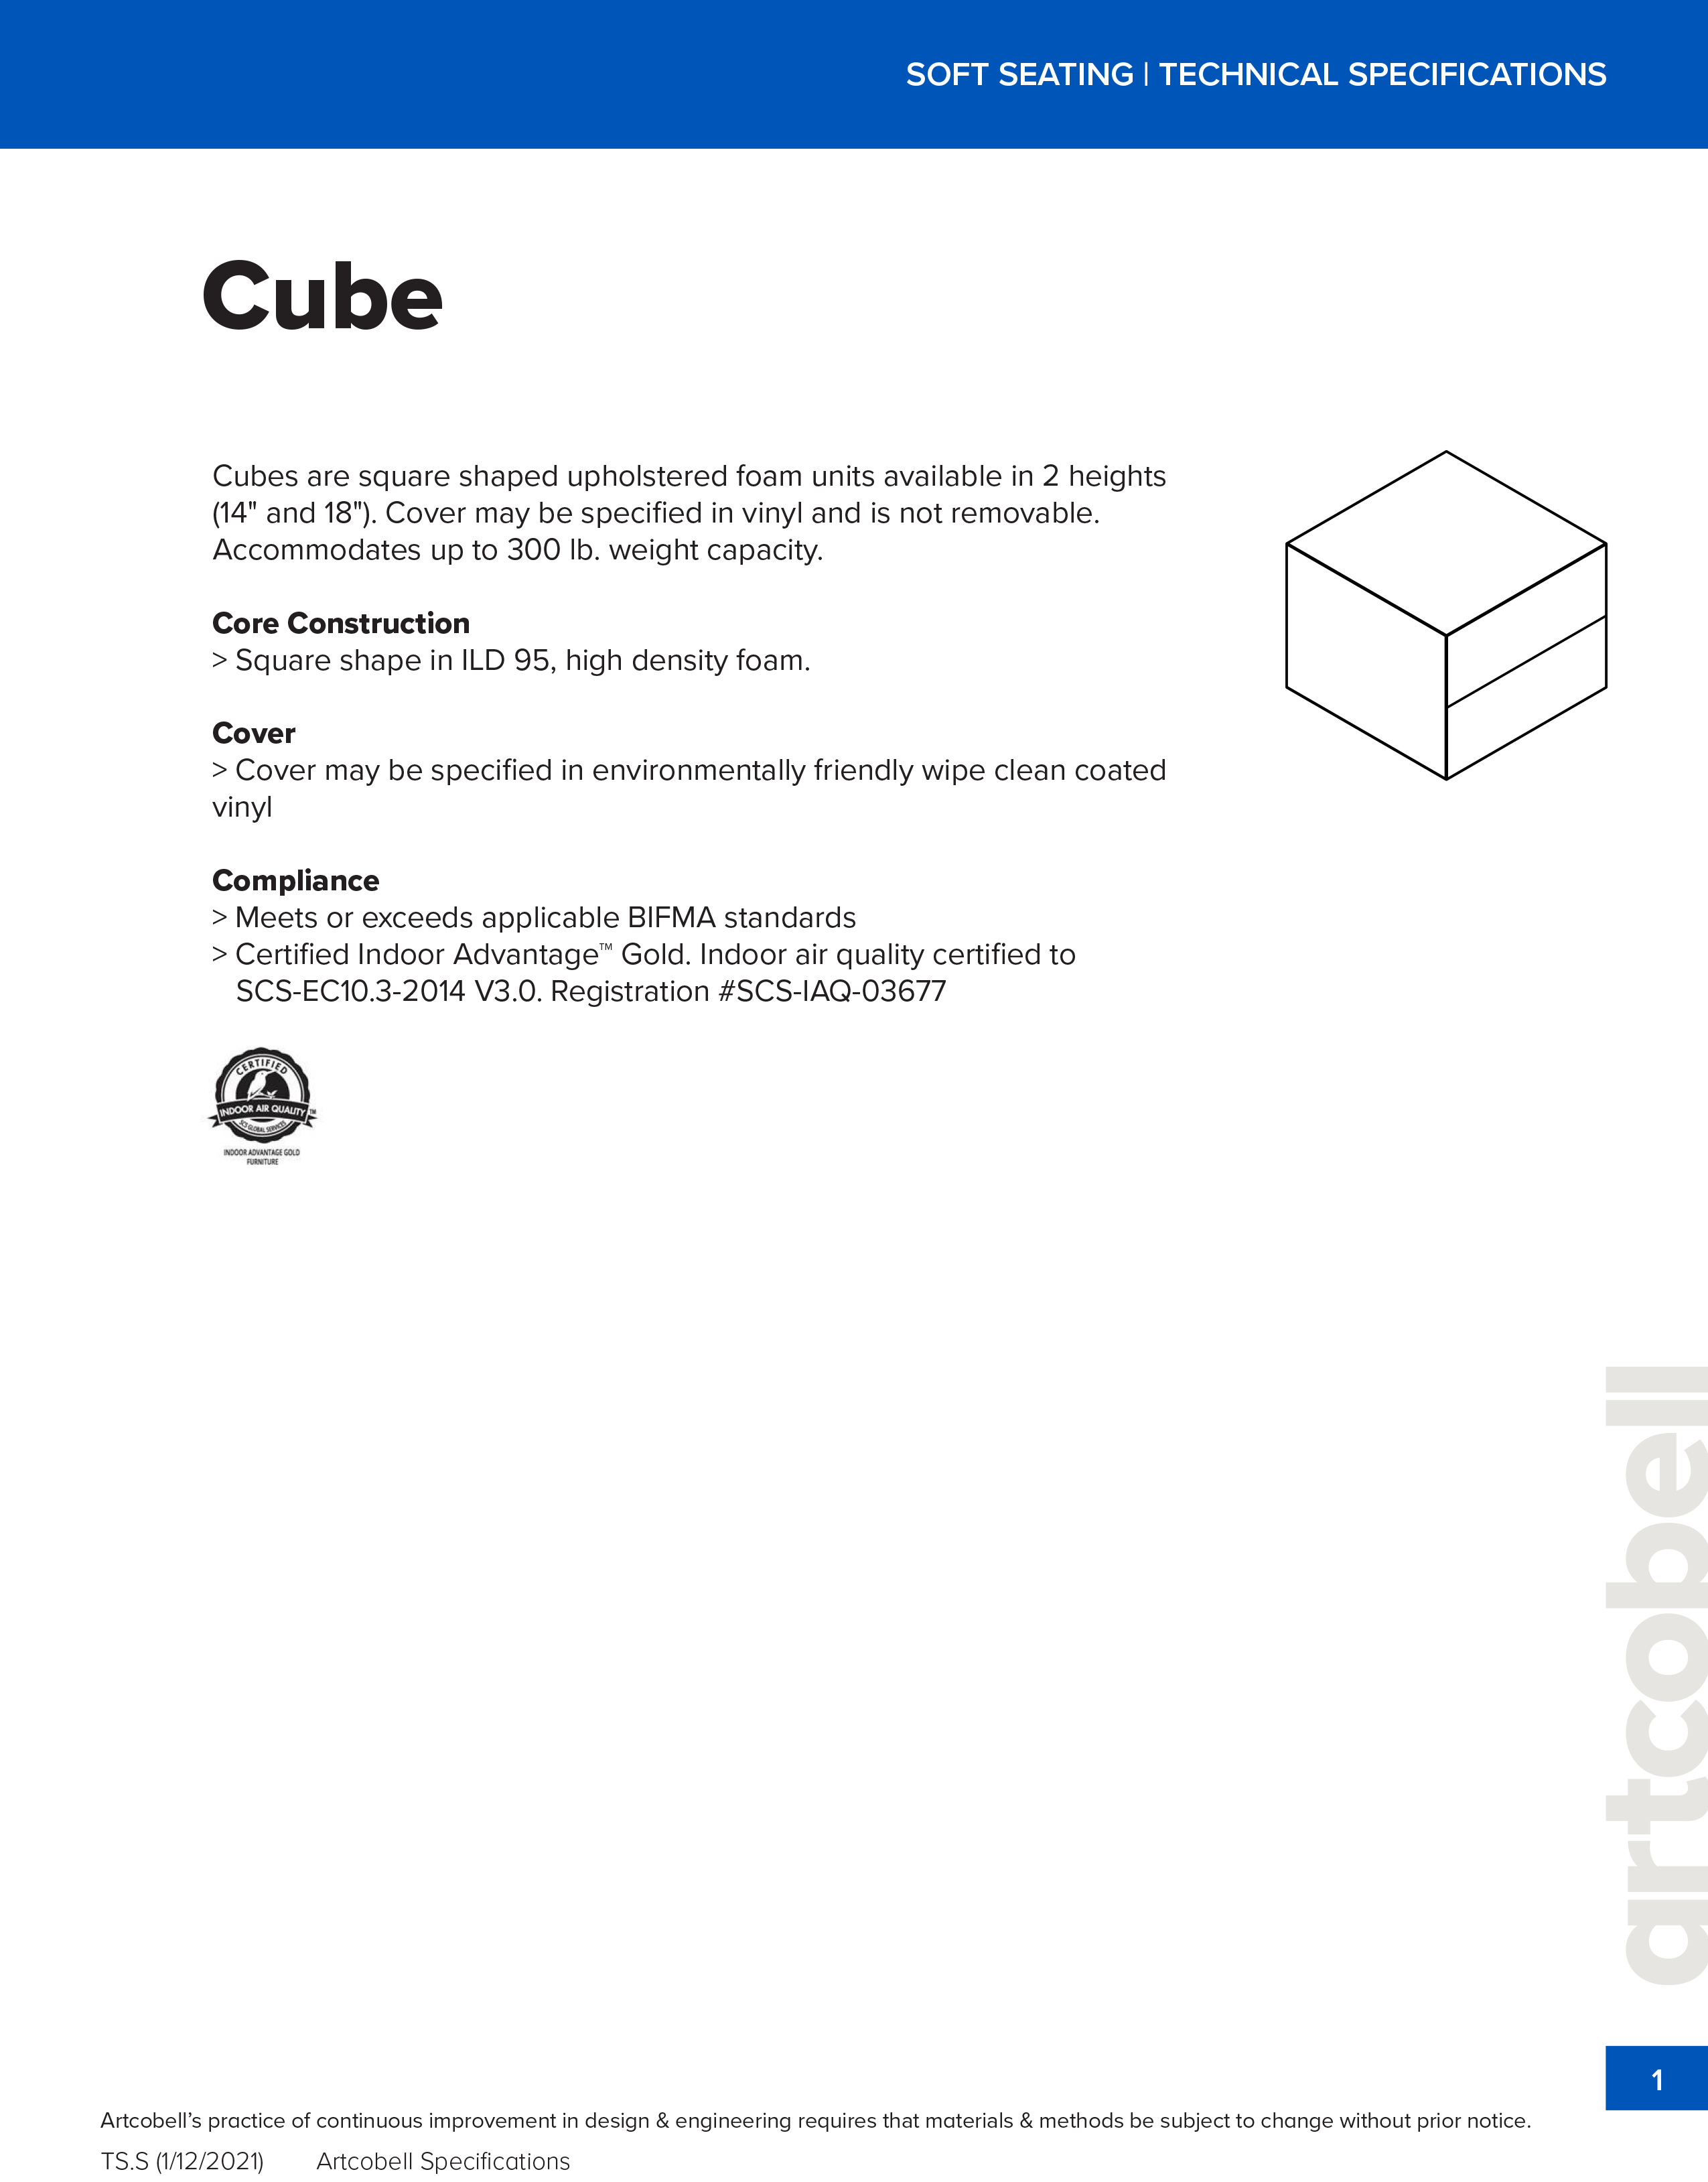 SoftSeatingSpecifications_Cube